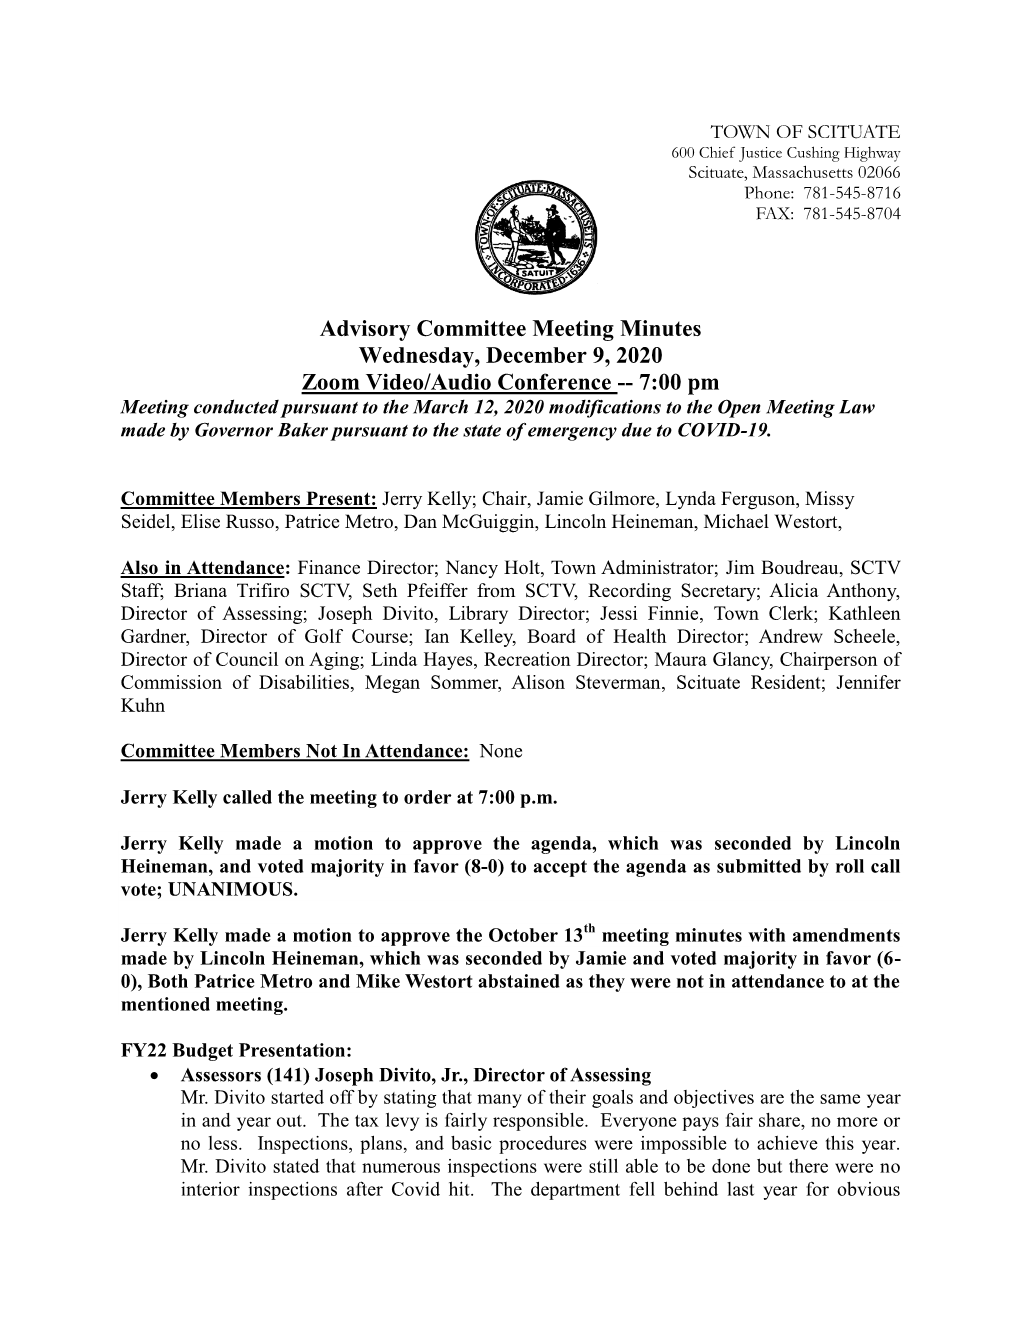 Advisory Committee Minutes December 9, 2020